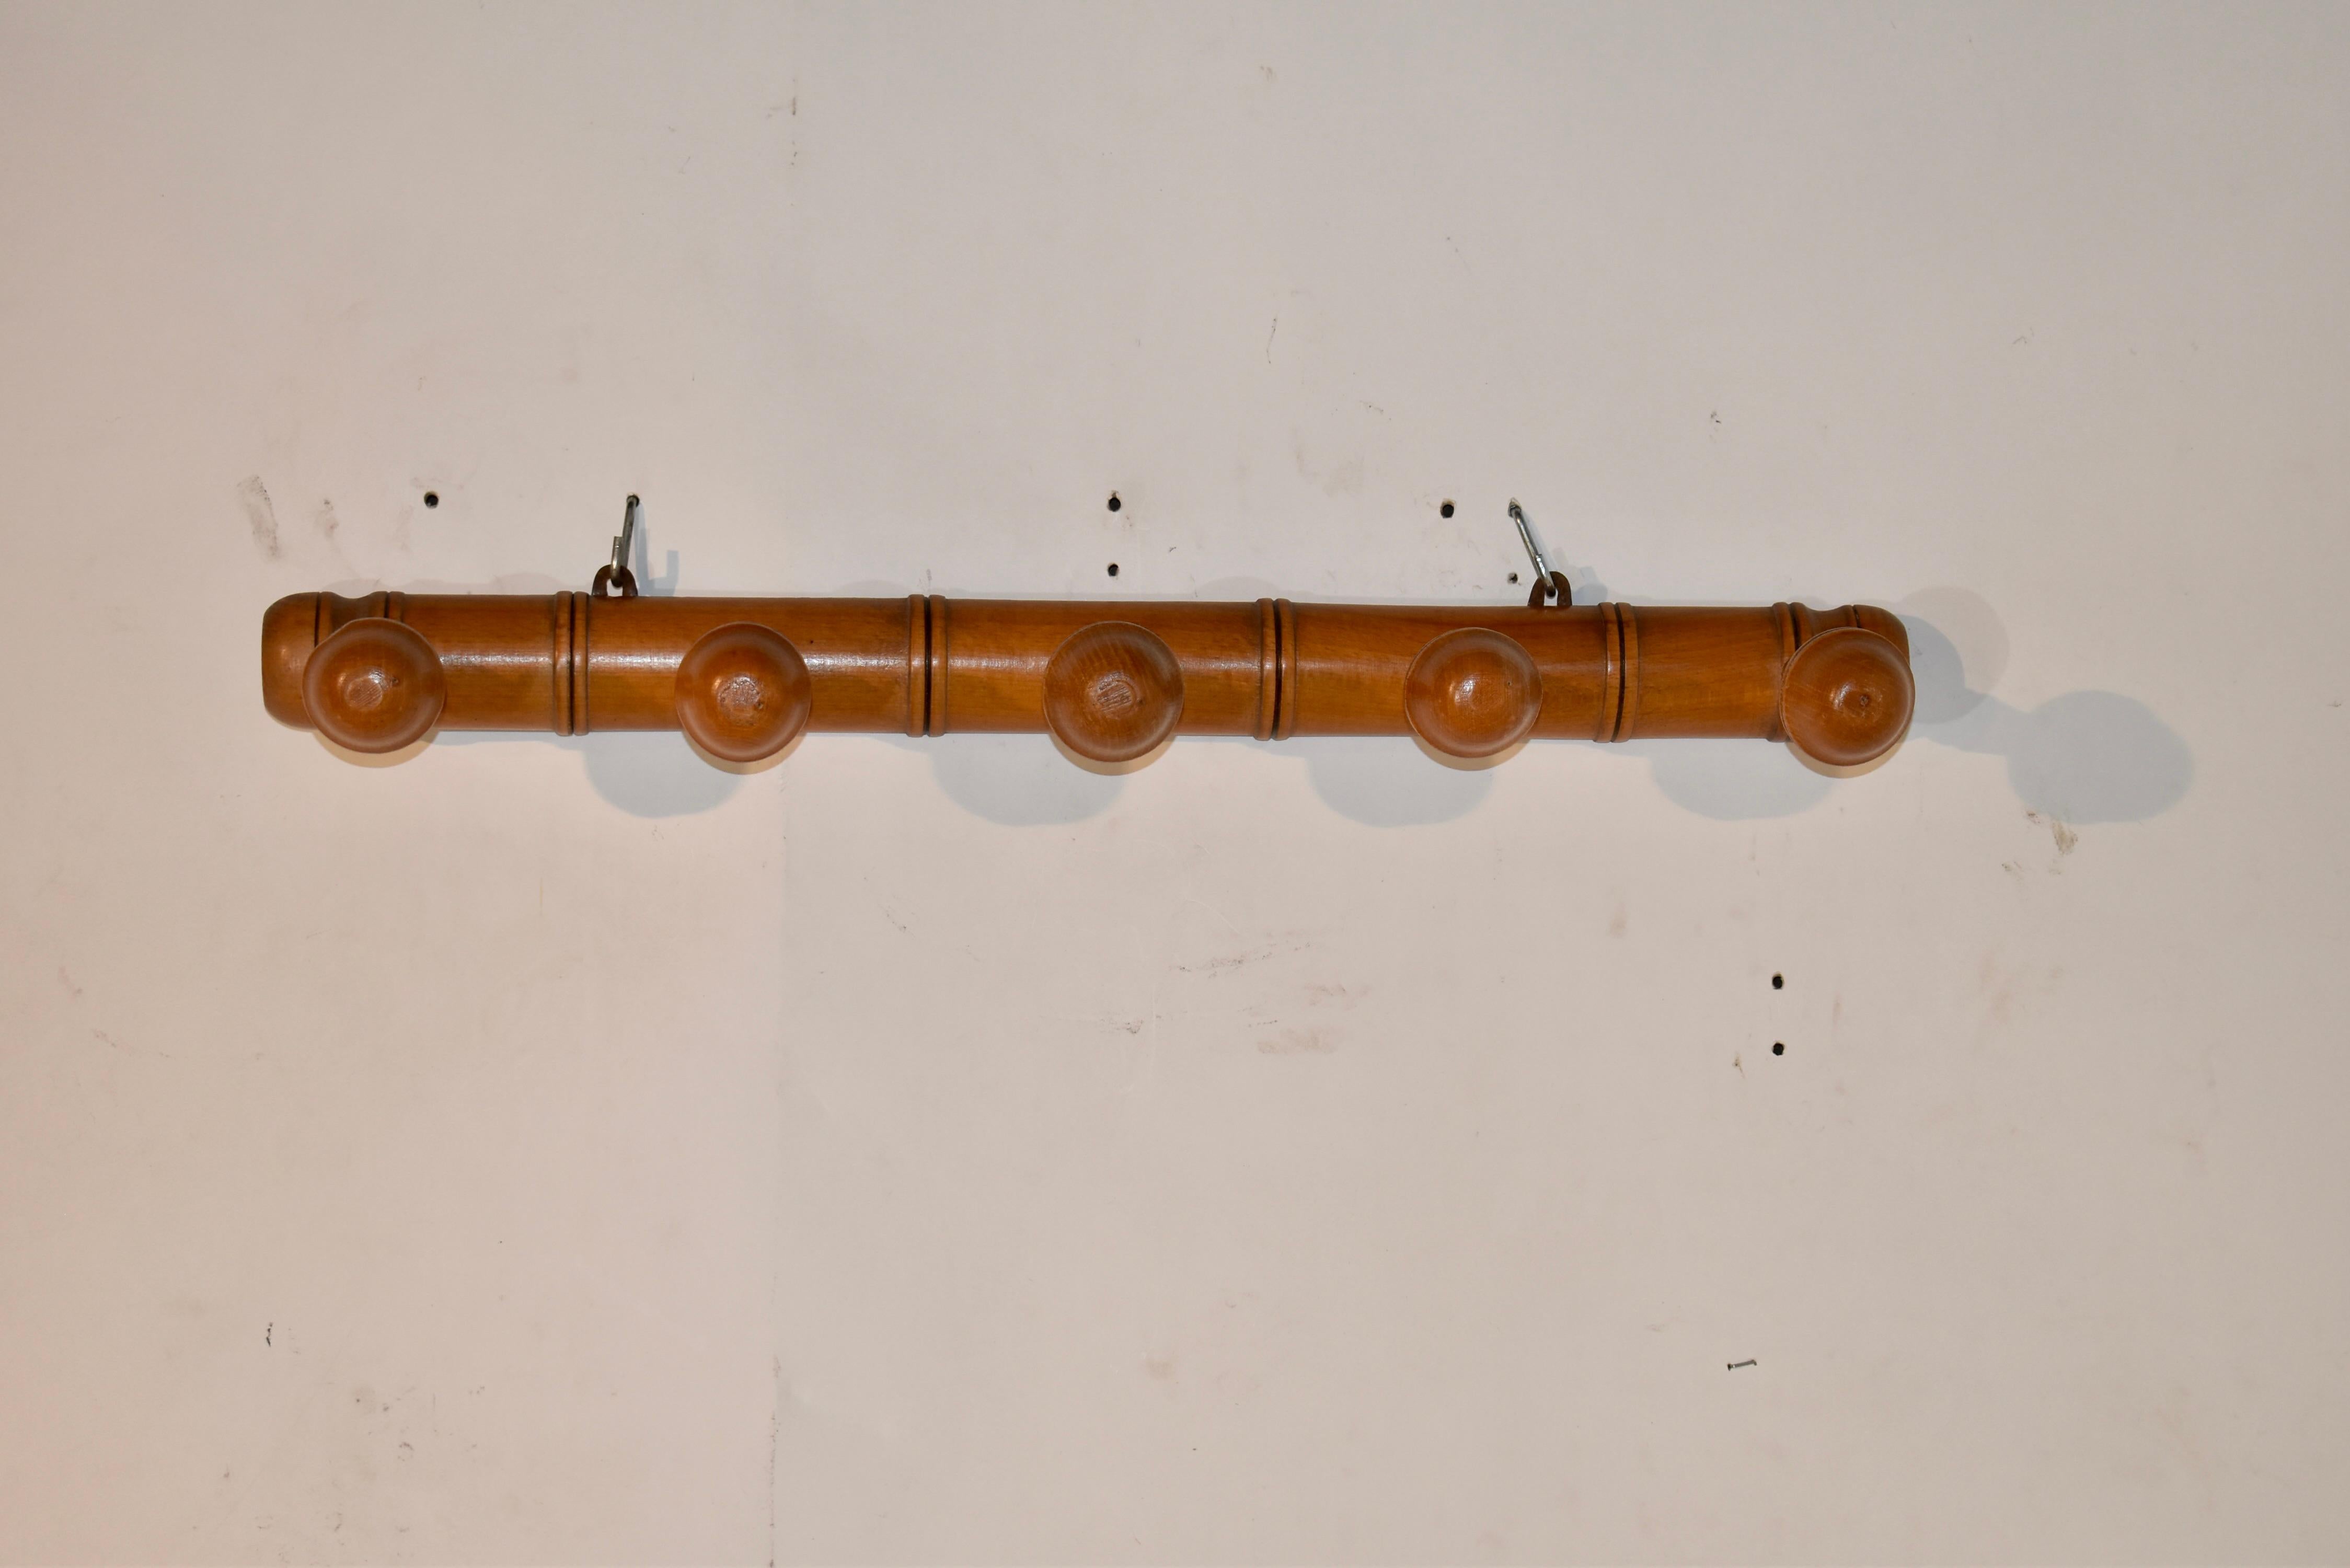 Circa 1920 five peg hat or coat rack from France, made from cherry. The back of the rack is designed with raised molding, to give a look of bamboo, and it has five hand turned lollipop pegs for hanging hats or coats. These are also great in a